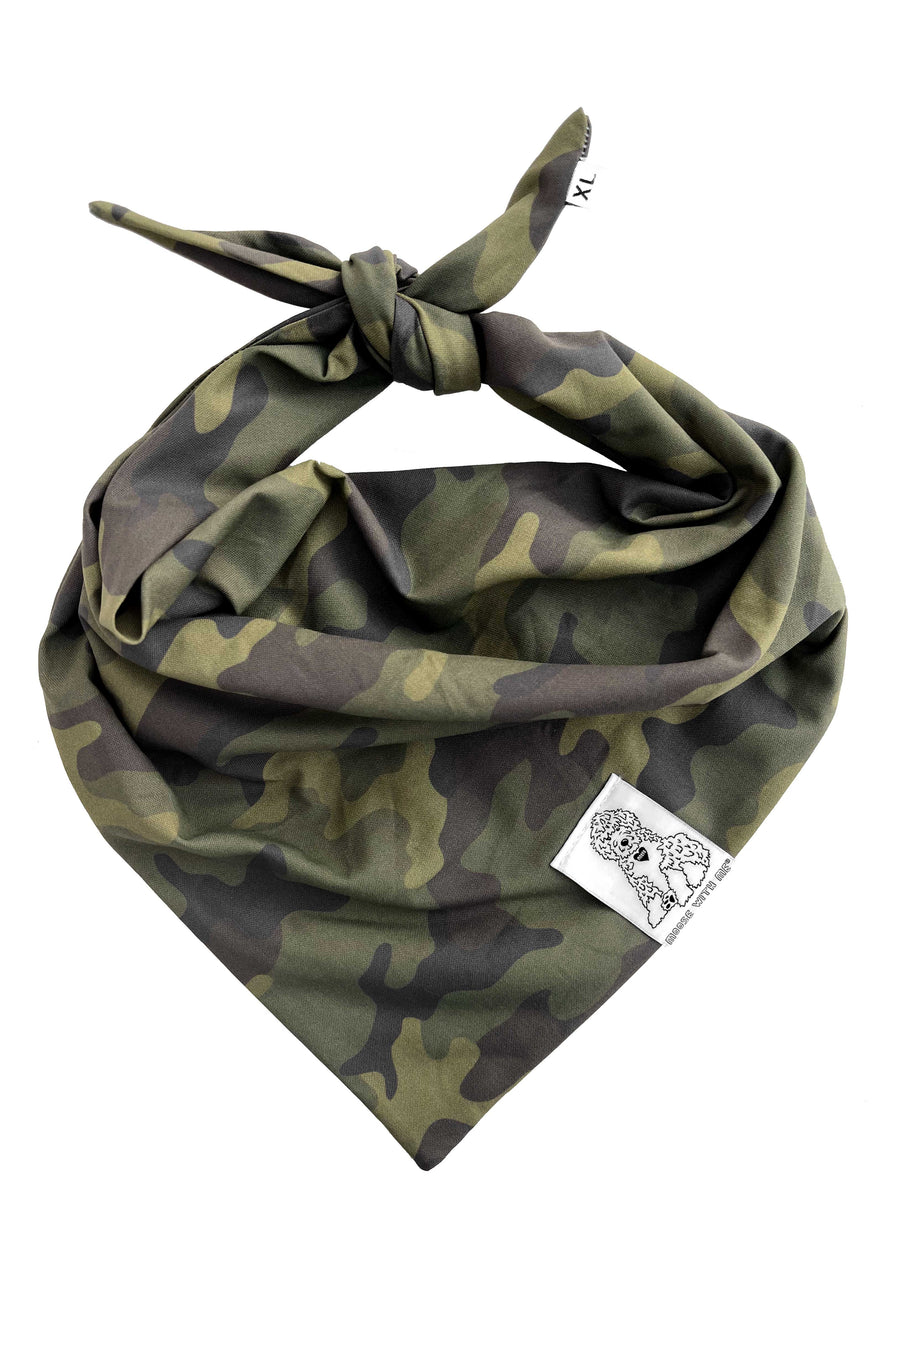 Dog Bandana Camouflage - Customize with Interchangeable Velcro Patches